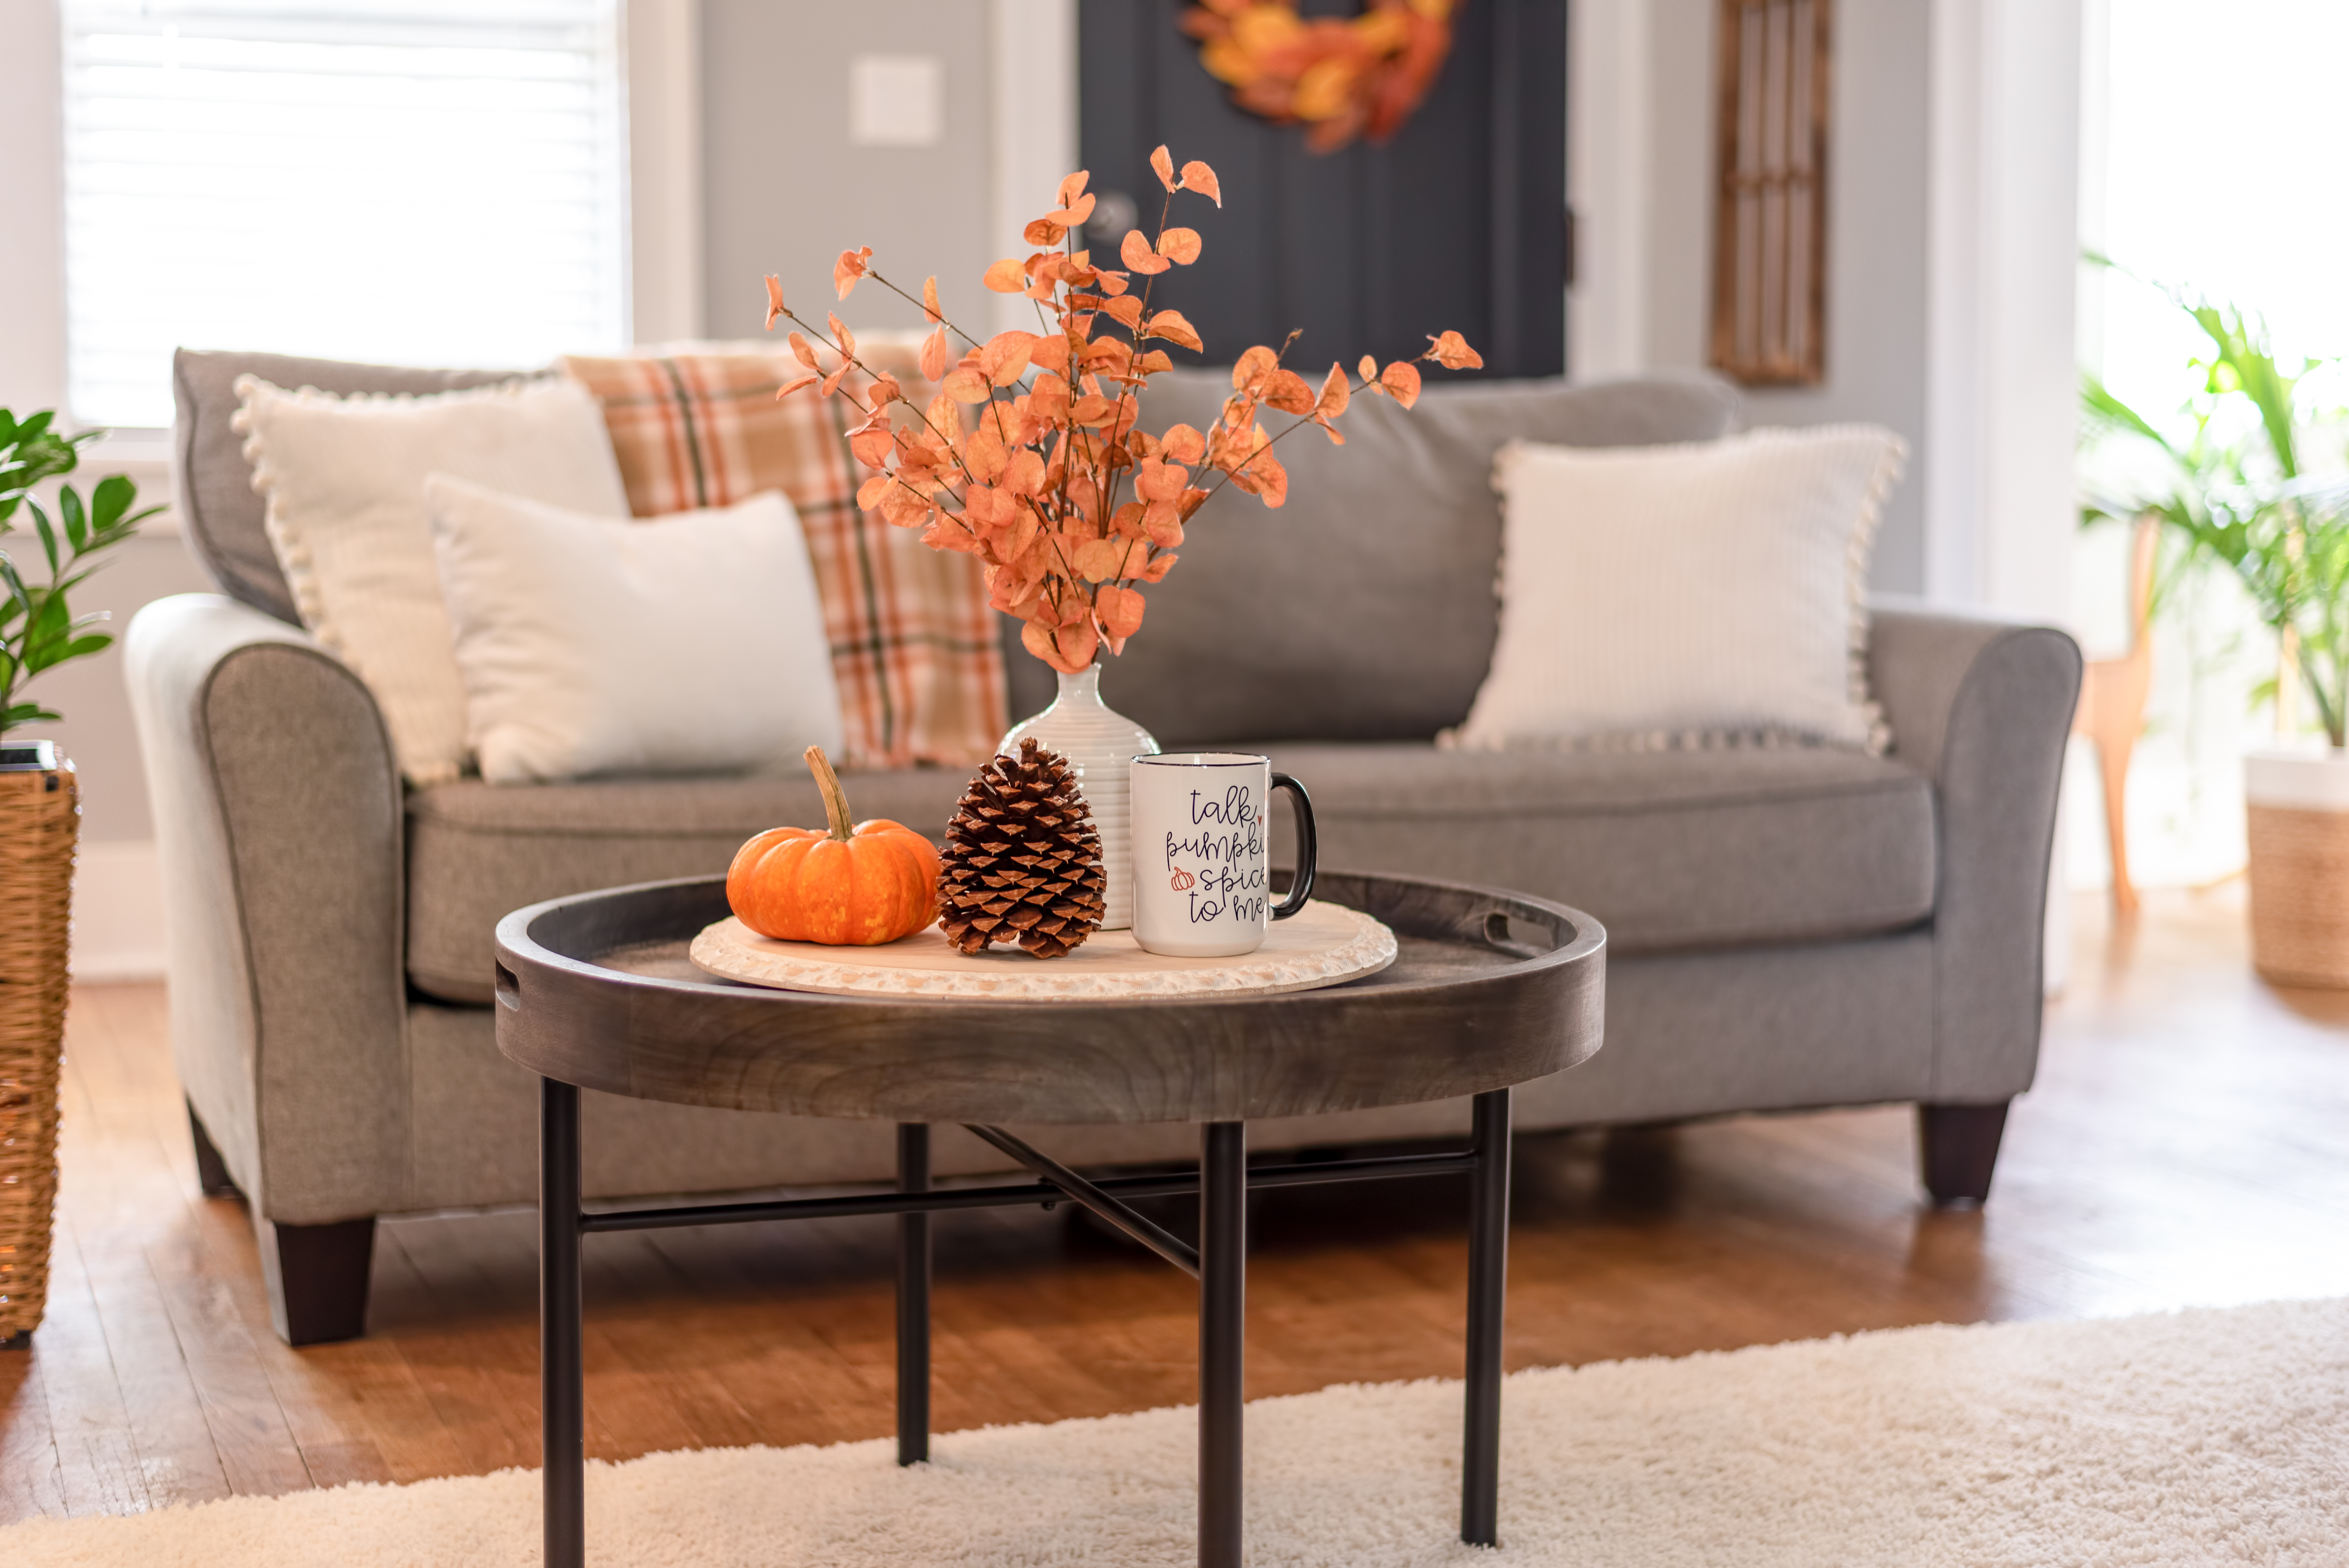 Autumn interior design tips inspired by nature 